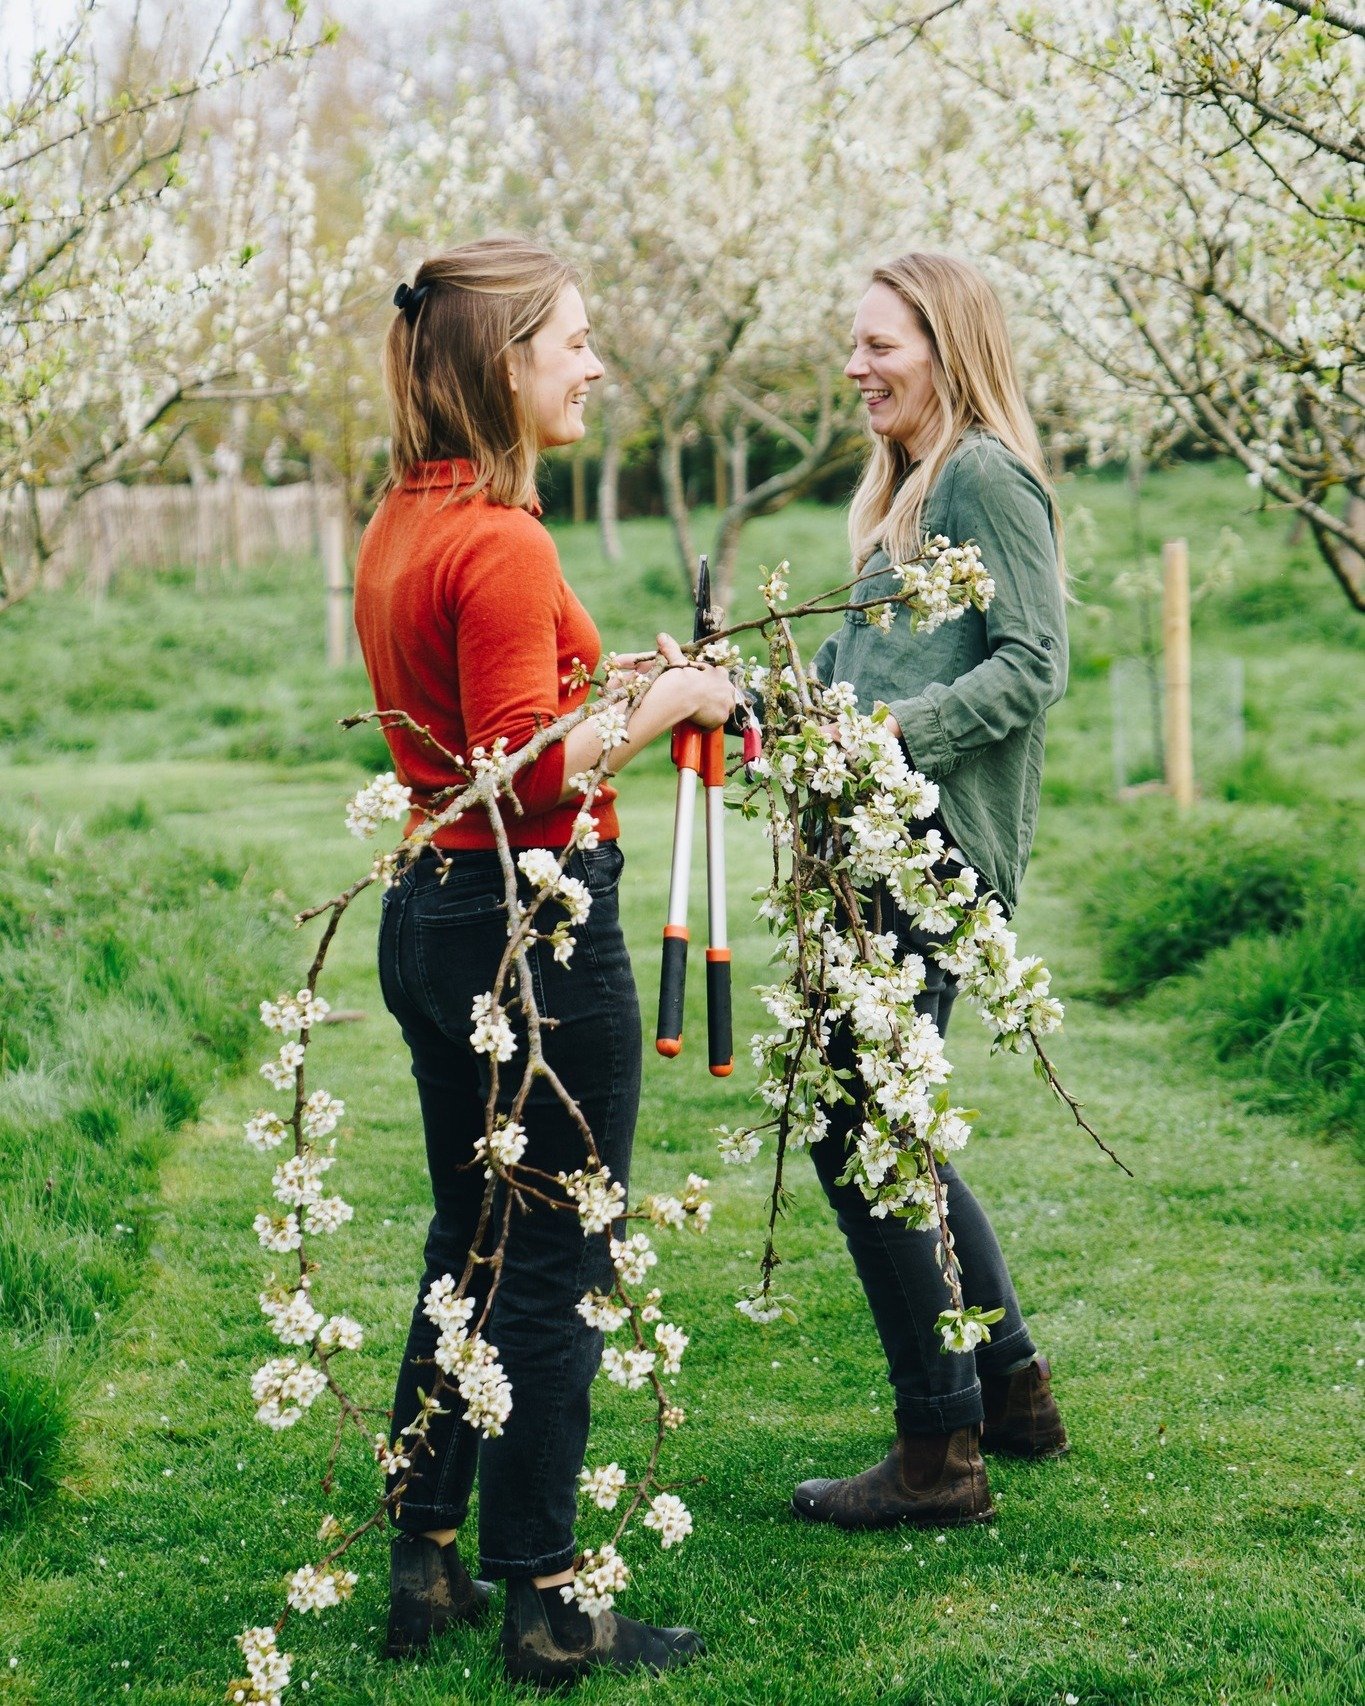 We've been harvesting more blossom for a funeral this week. Such a fleeting crop and gale force winds don't help but we enjoy it whilst it lasts.

#blossom #springflowers #britishflowers #seasonalflowers #flowerfarm